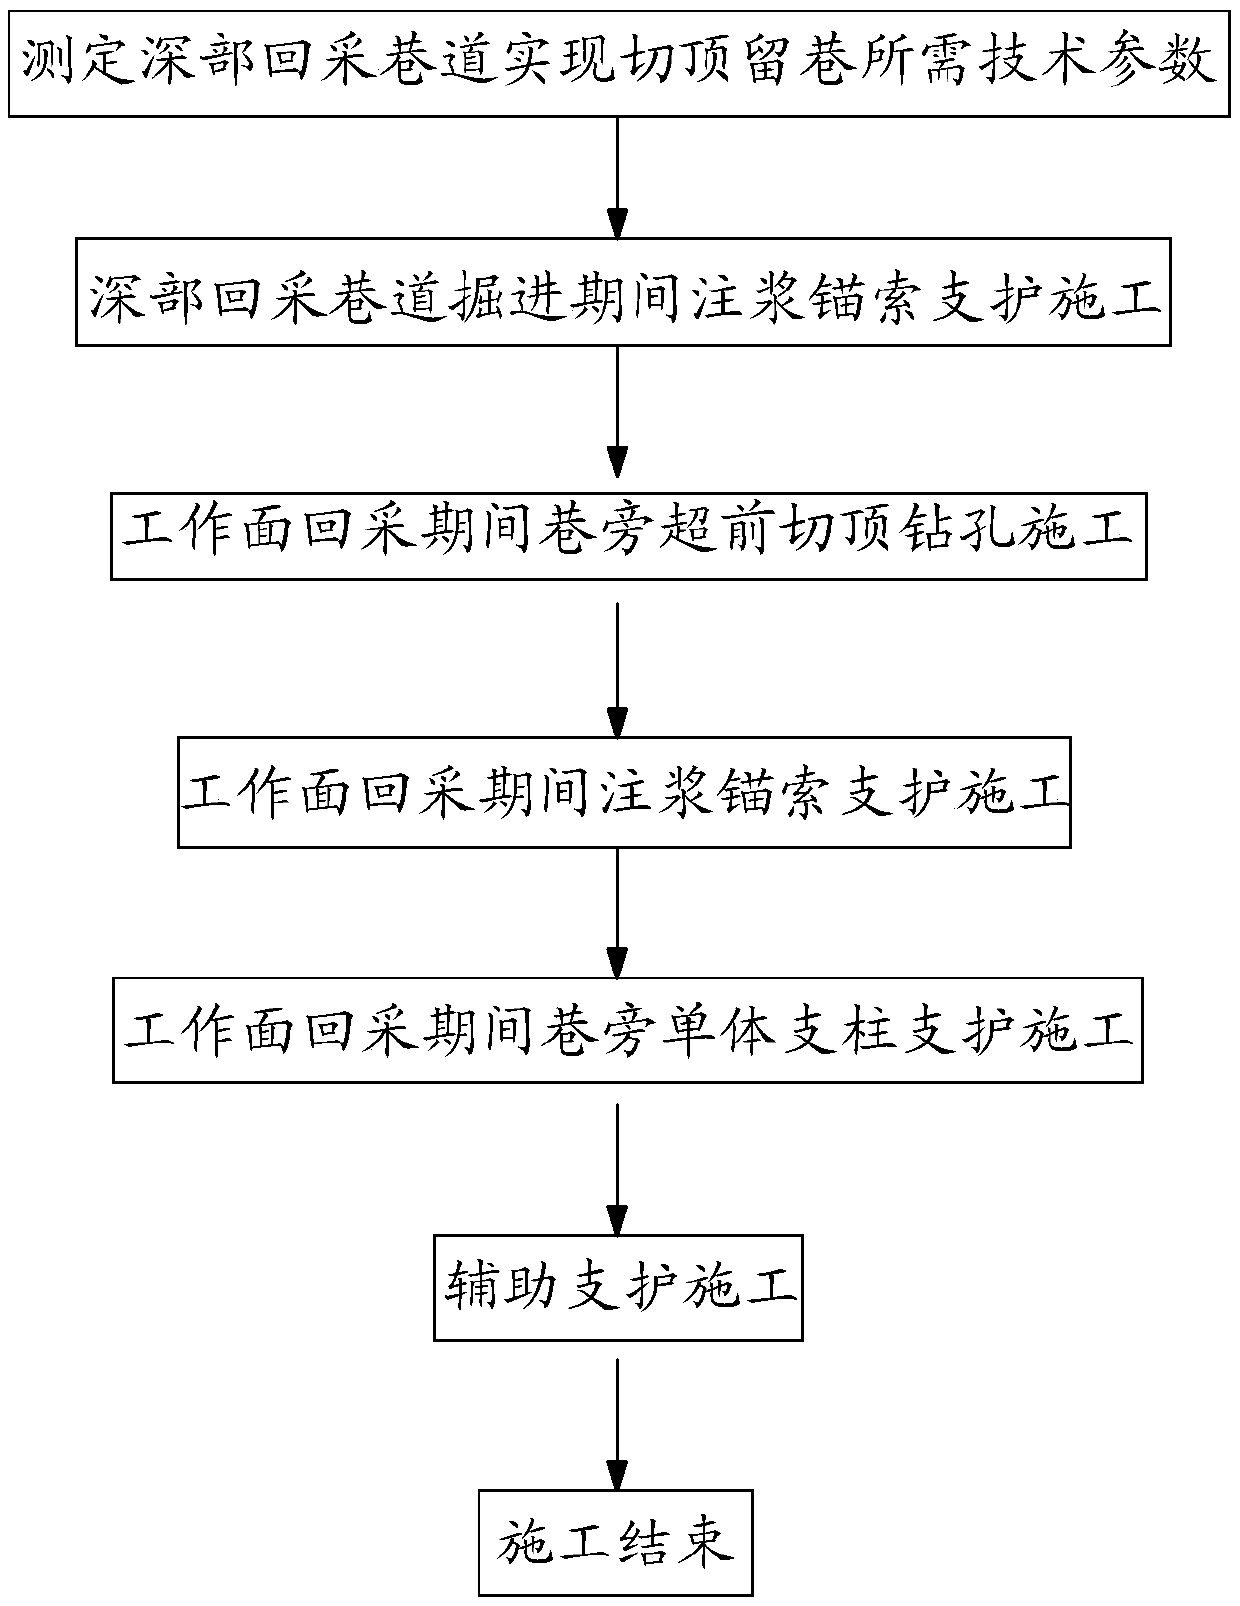 Main control and roadway retaining method for anchor injection and top-cutting in deep mining roadway